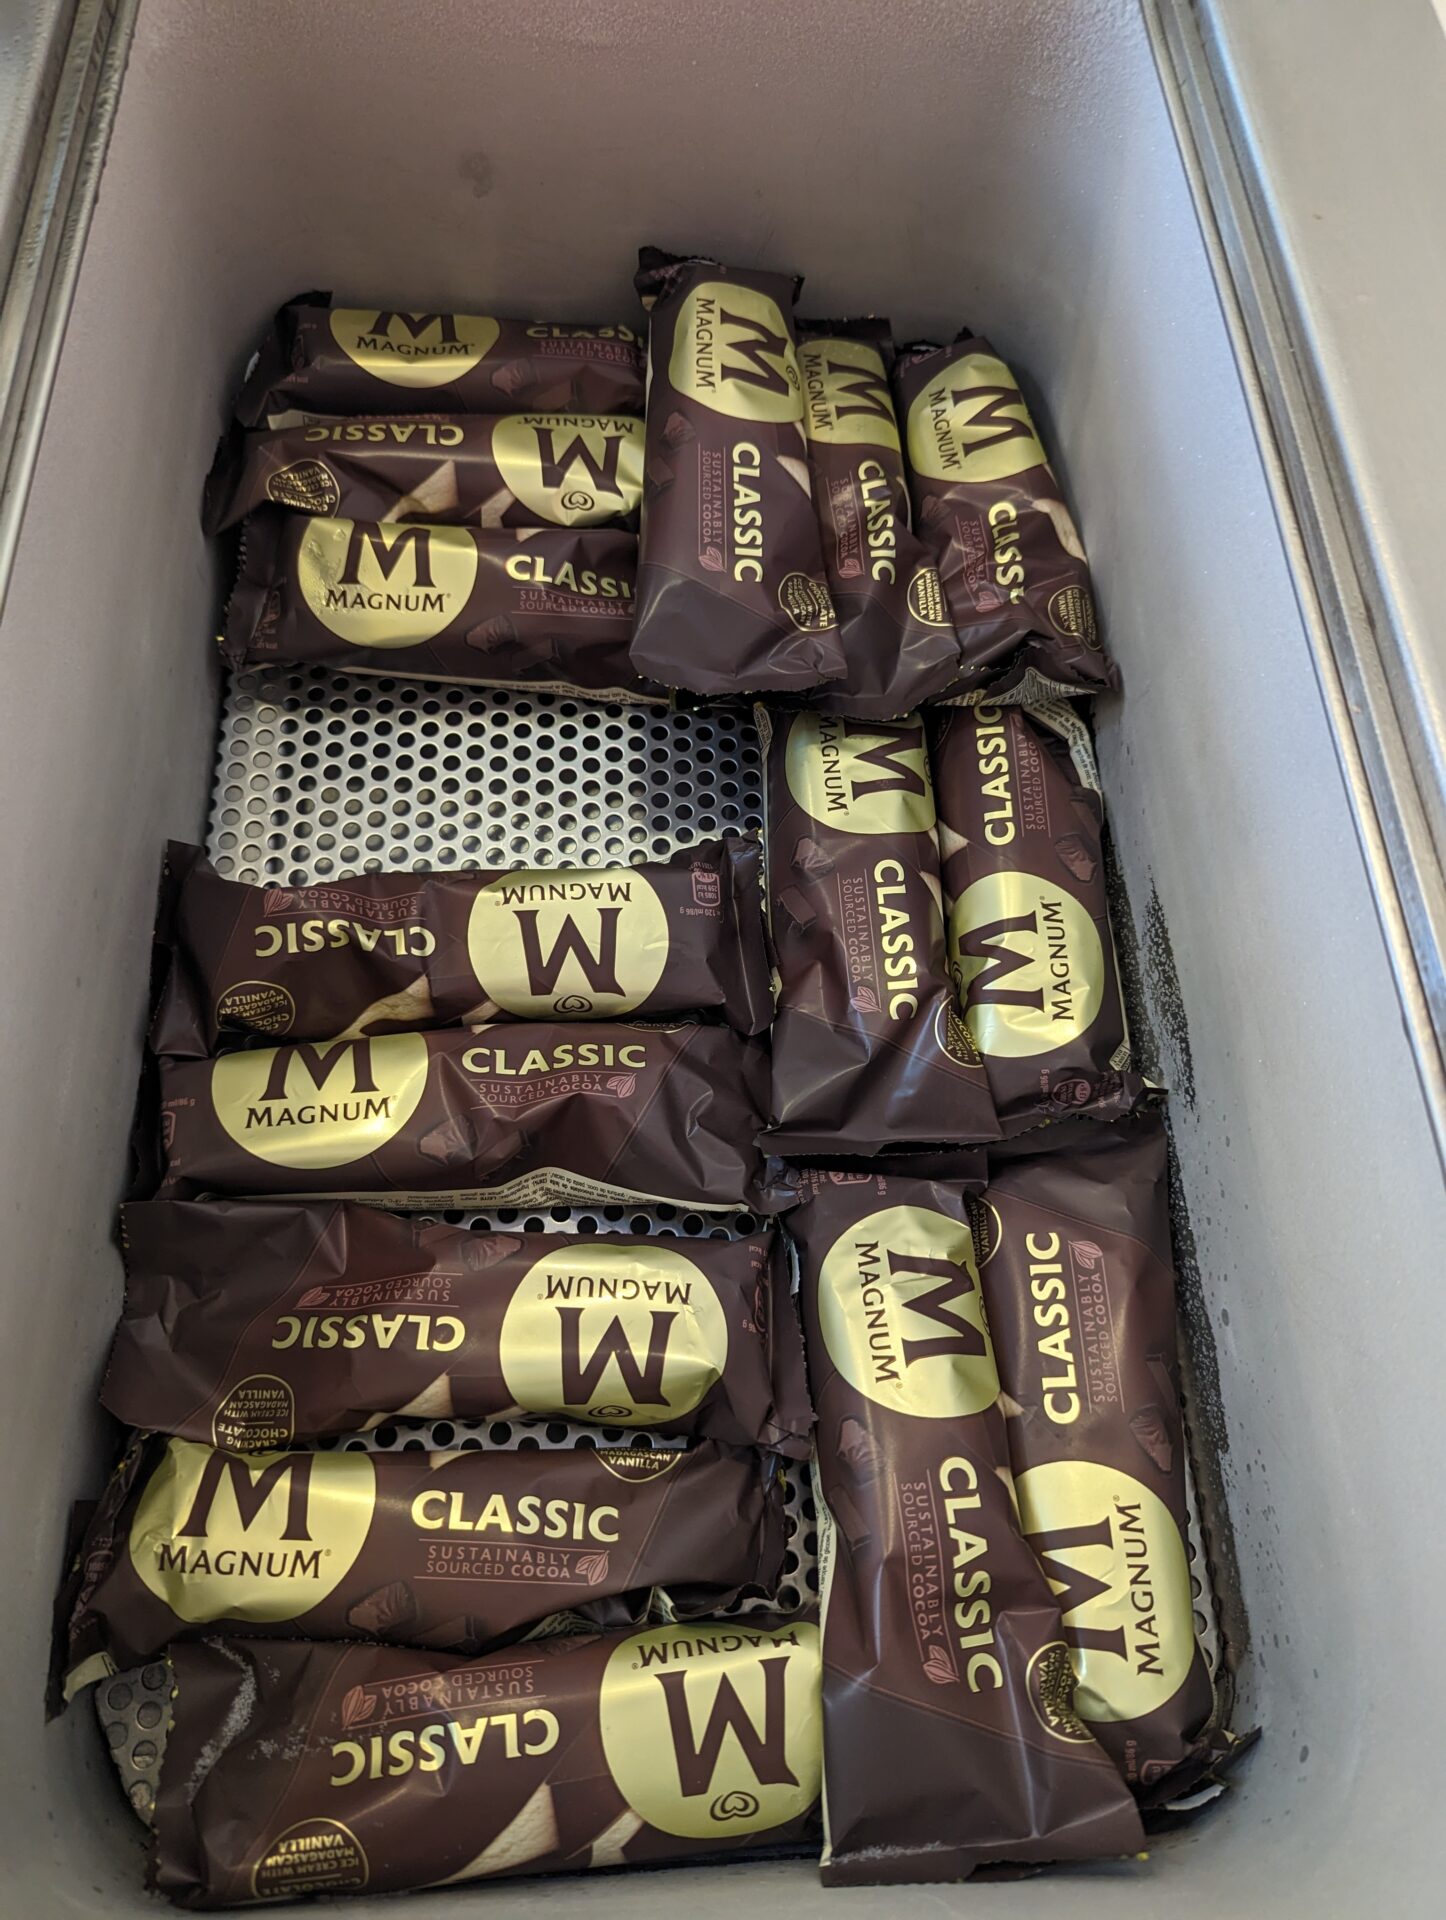 a group of packages of chocolate bars in a freezer